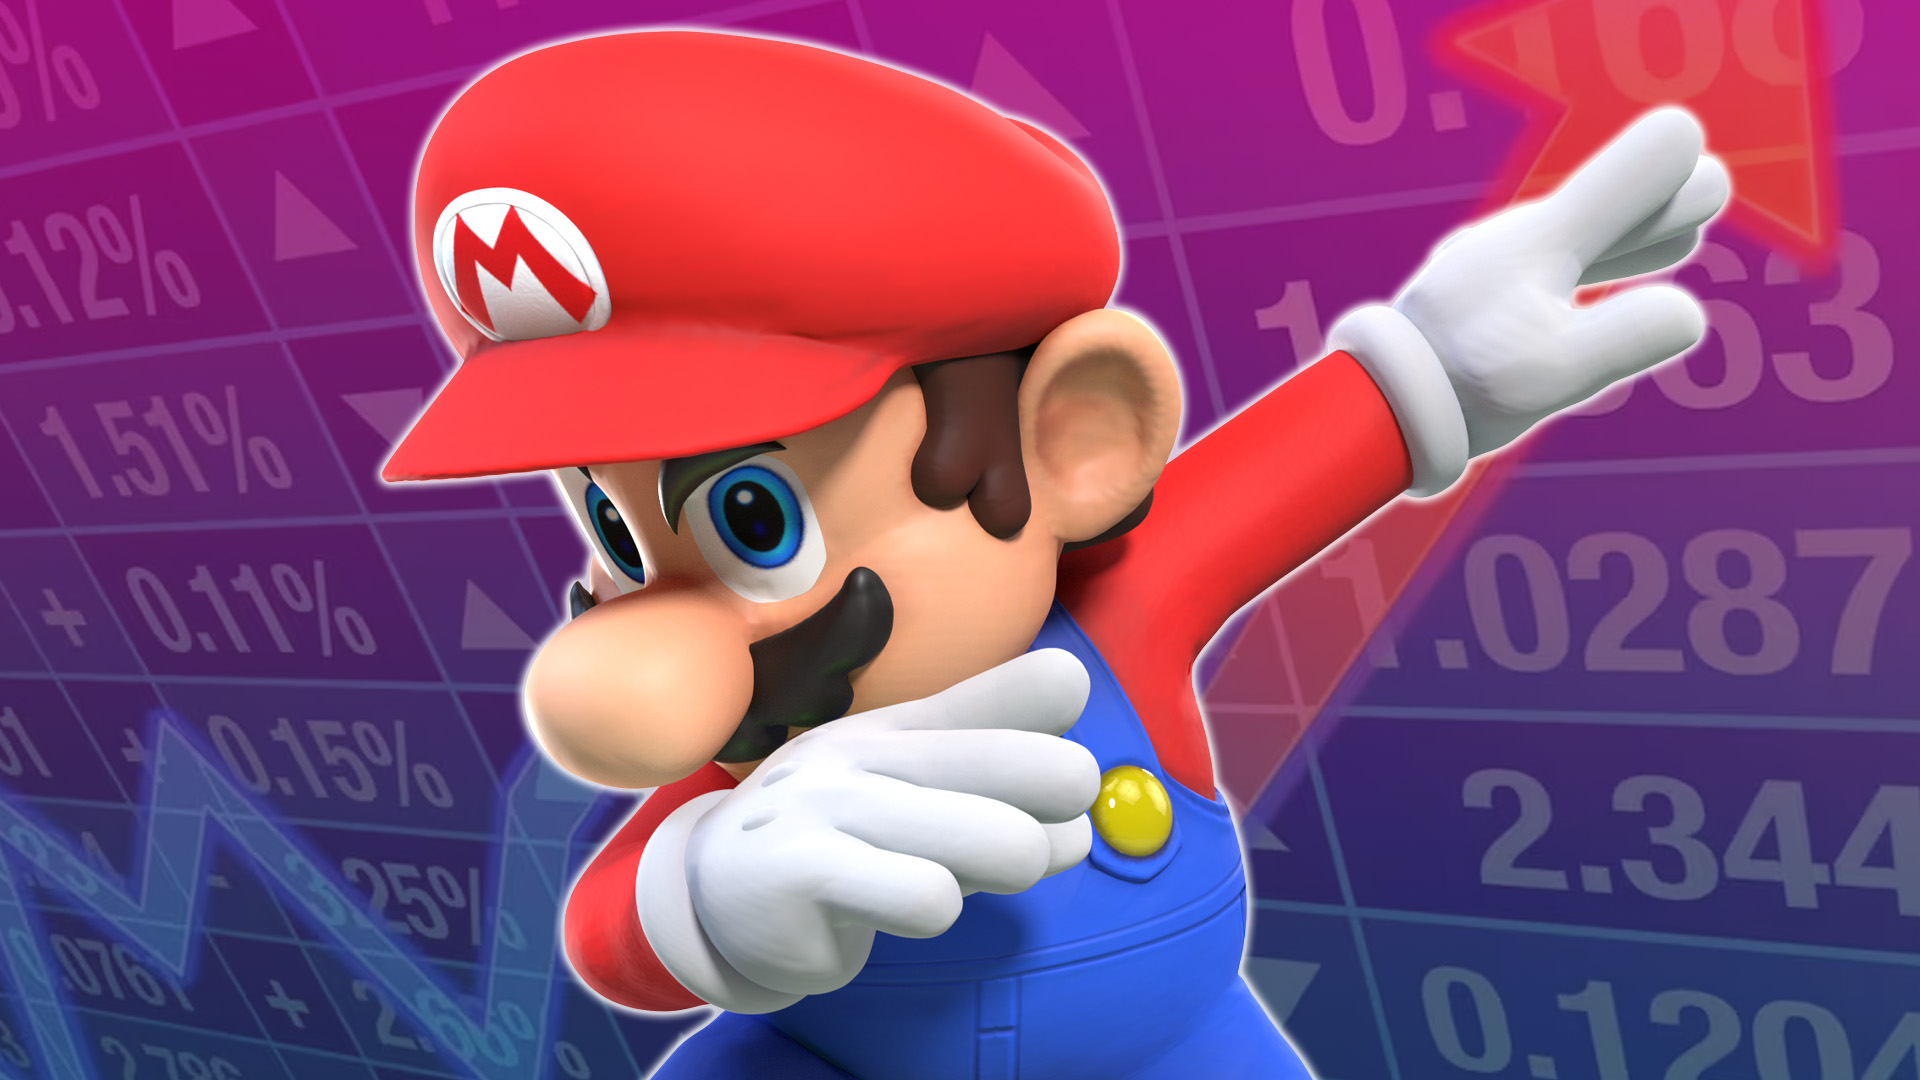 There are now over 330 million Nintendo Accounts